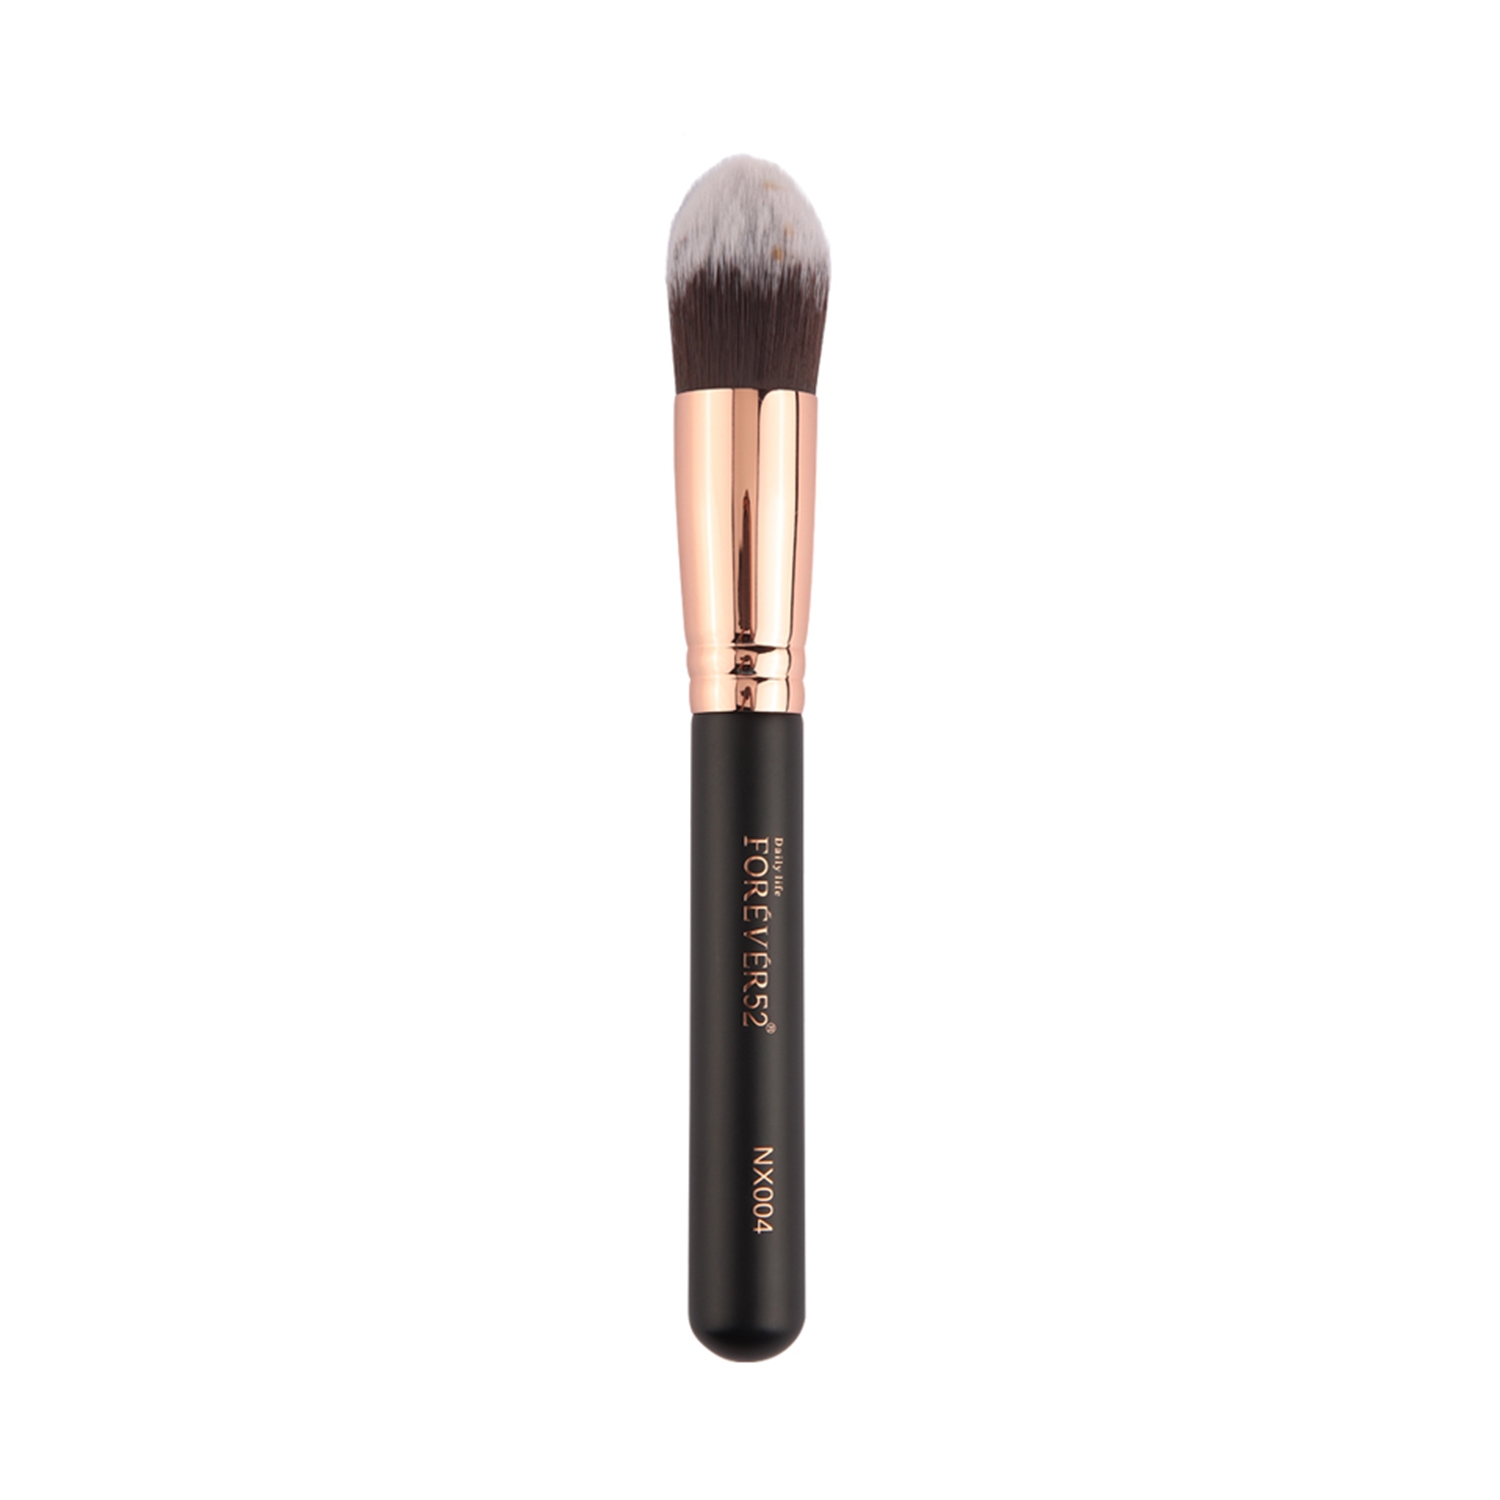 Daily Life Forever52 | PDaily Life Forever52 Foundation Brush - NX004 (1Pc)